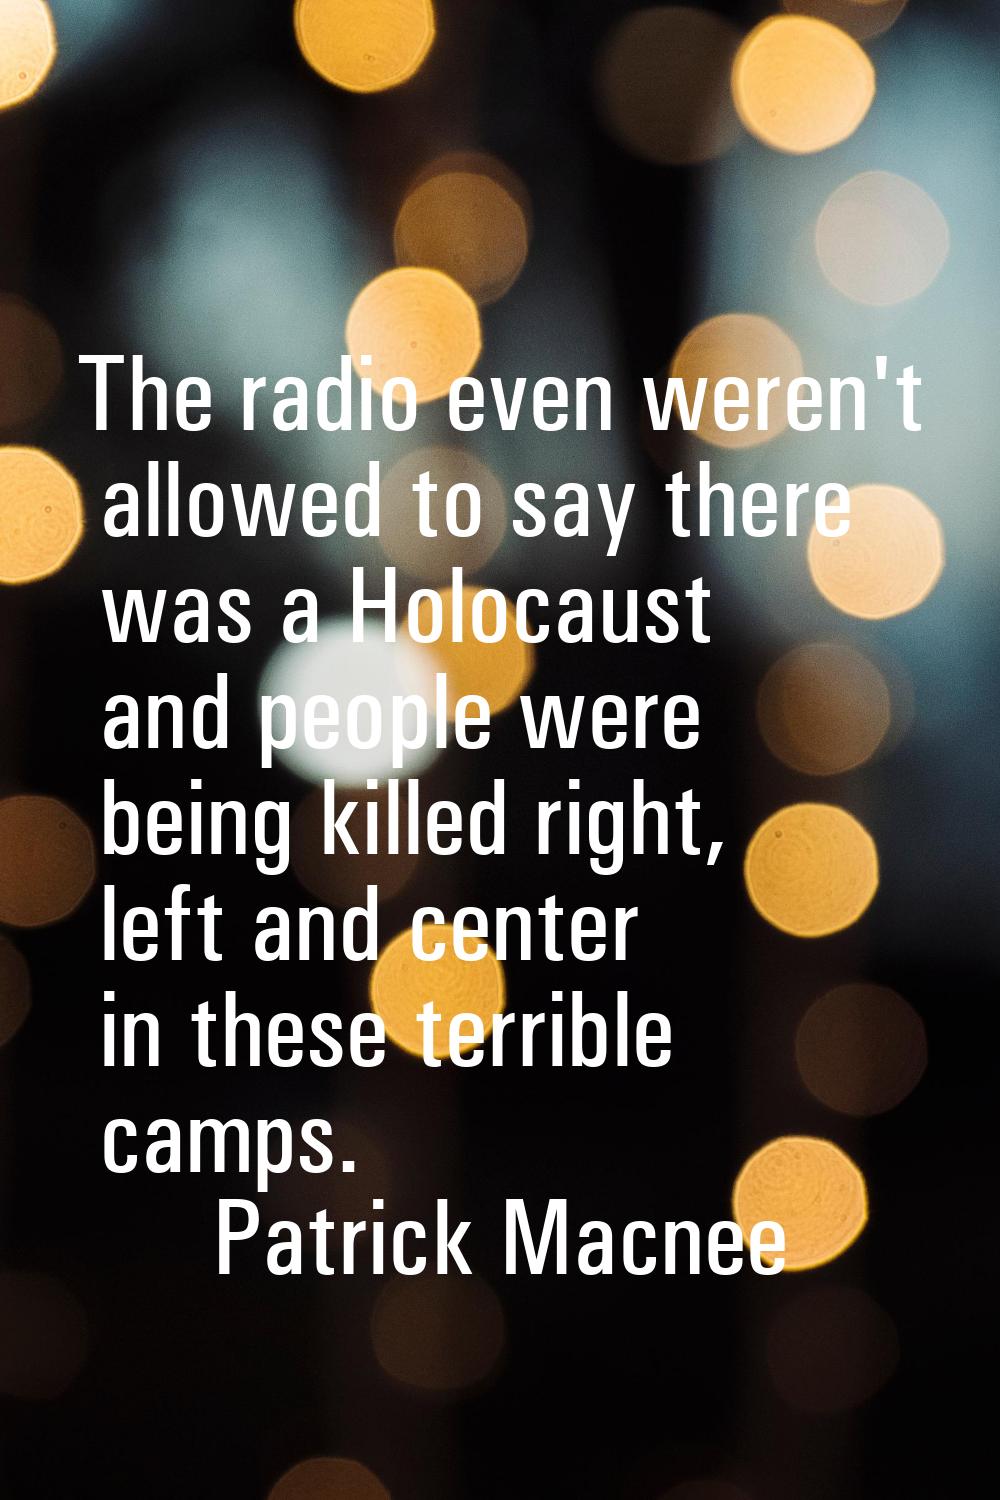 The radio even weren't allowed to say there was a Holocaust and people were being killed right, lef